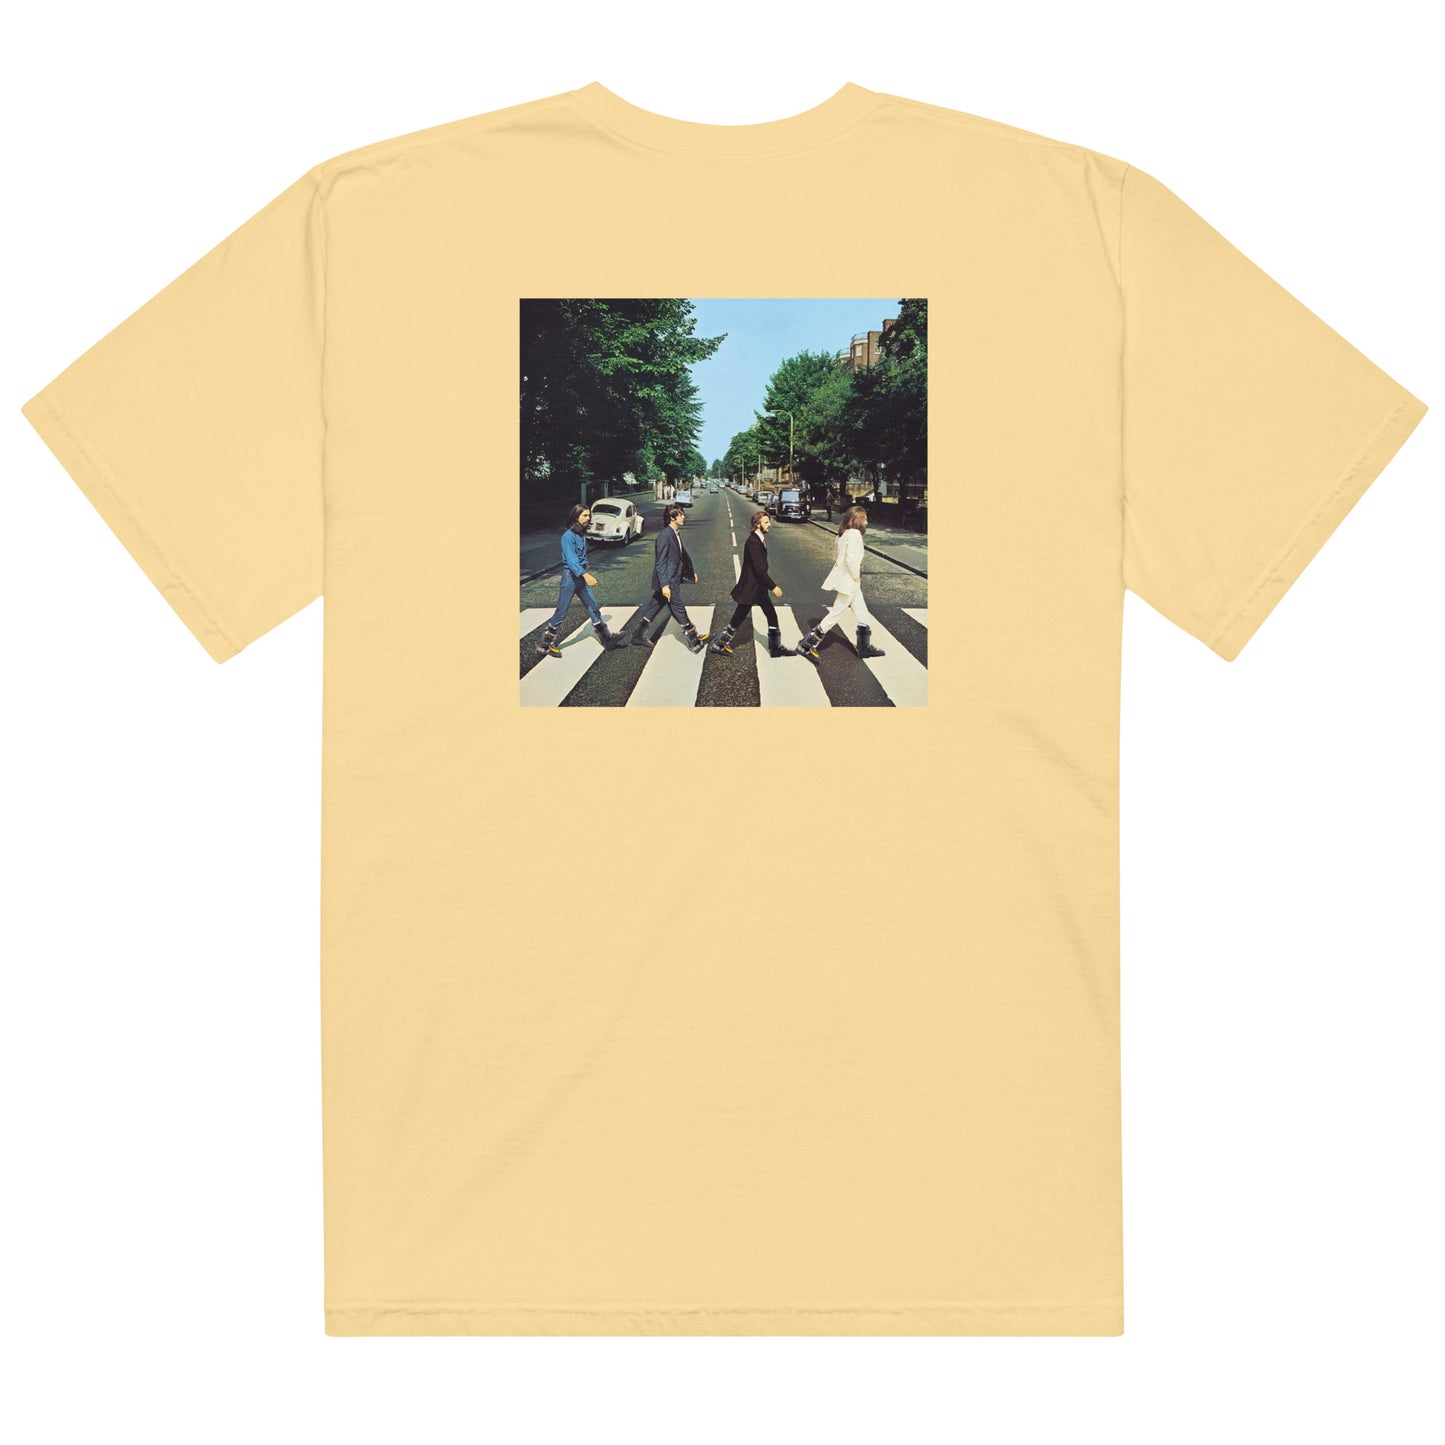 Beatles in Boots Shirt